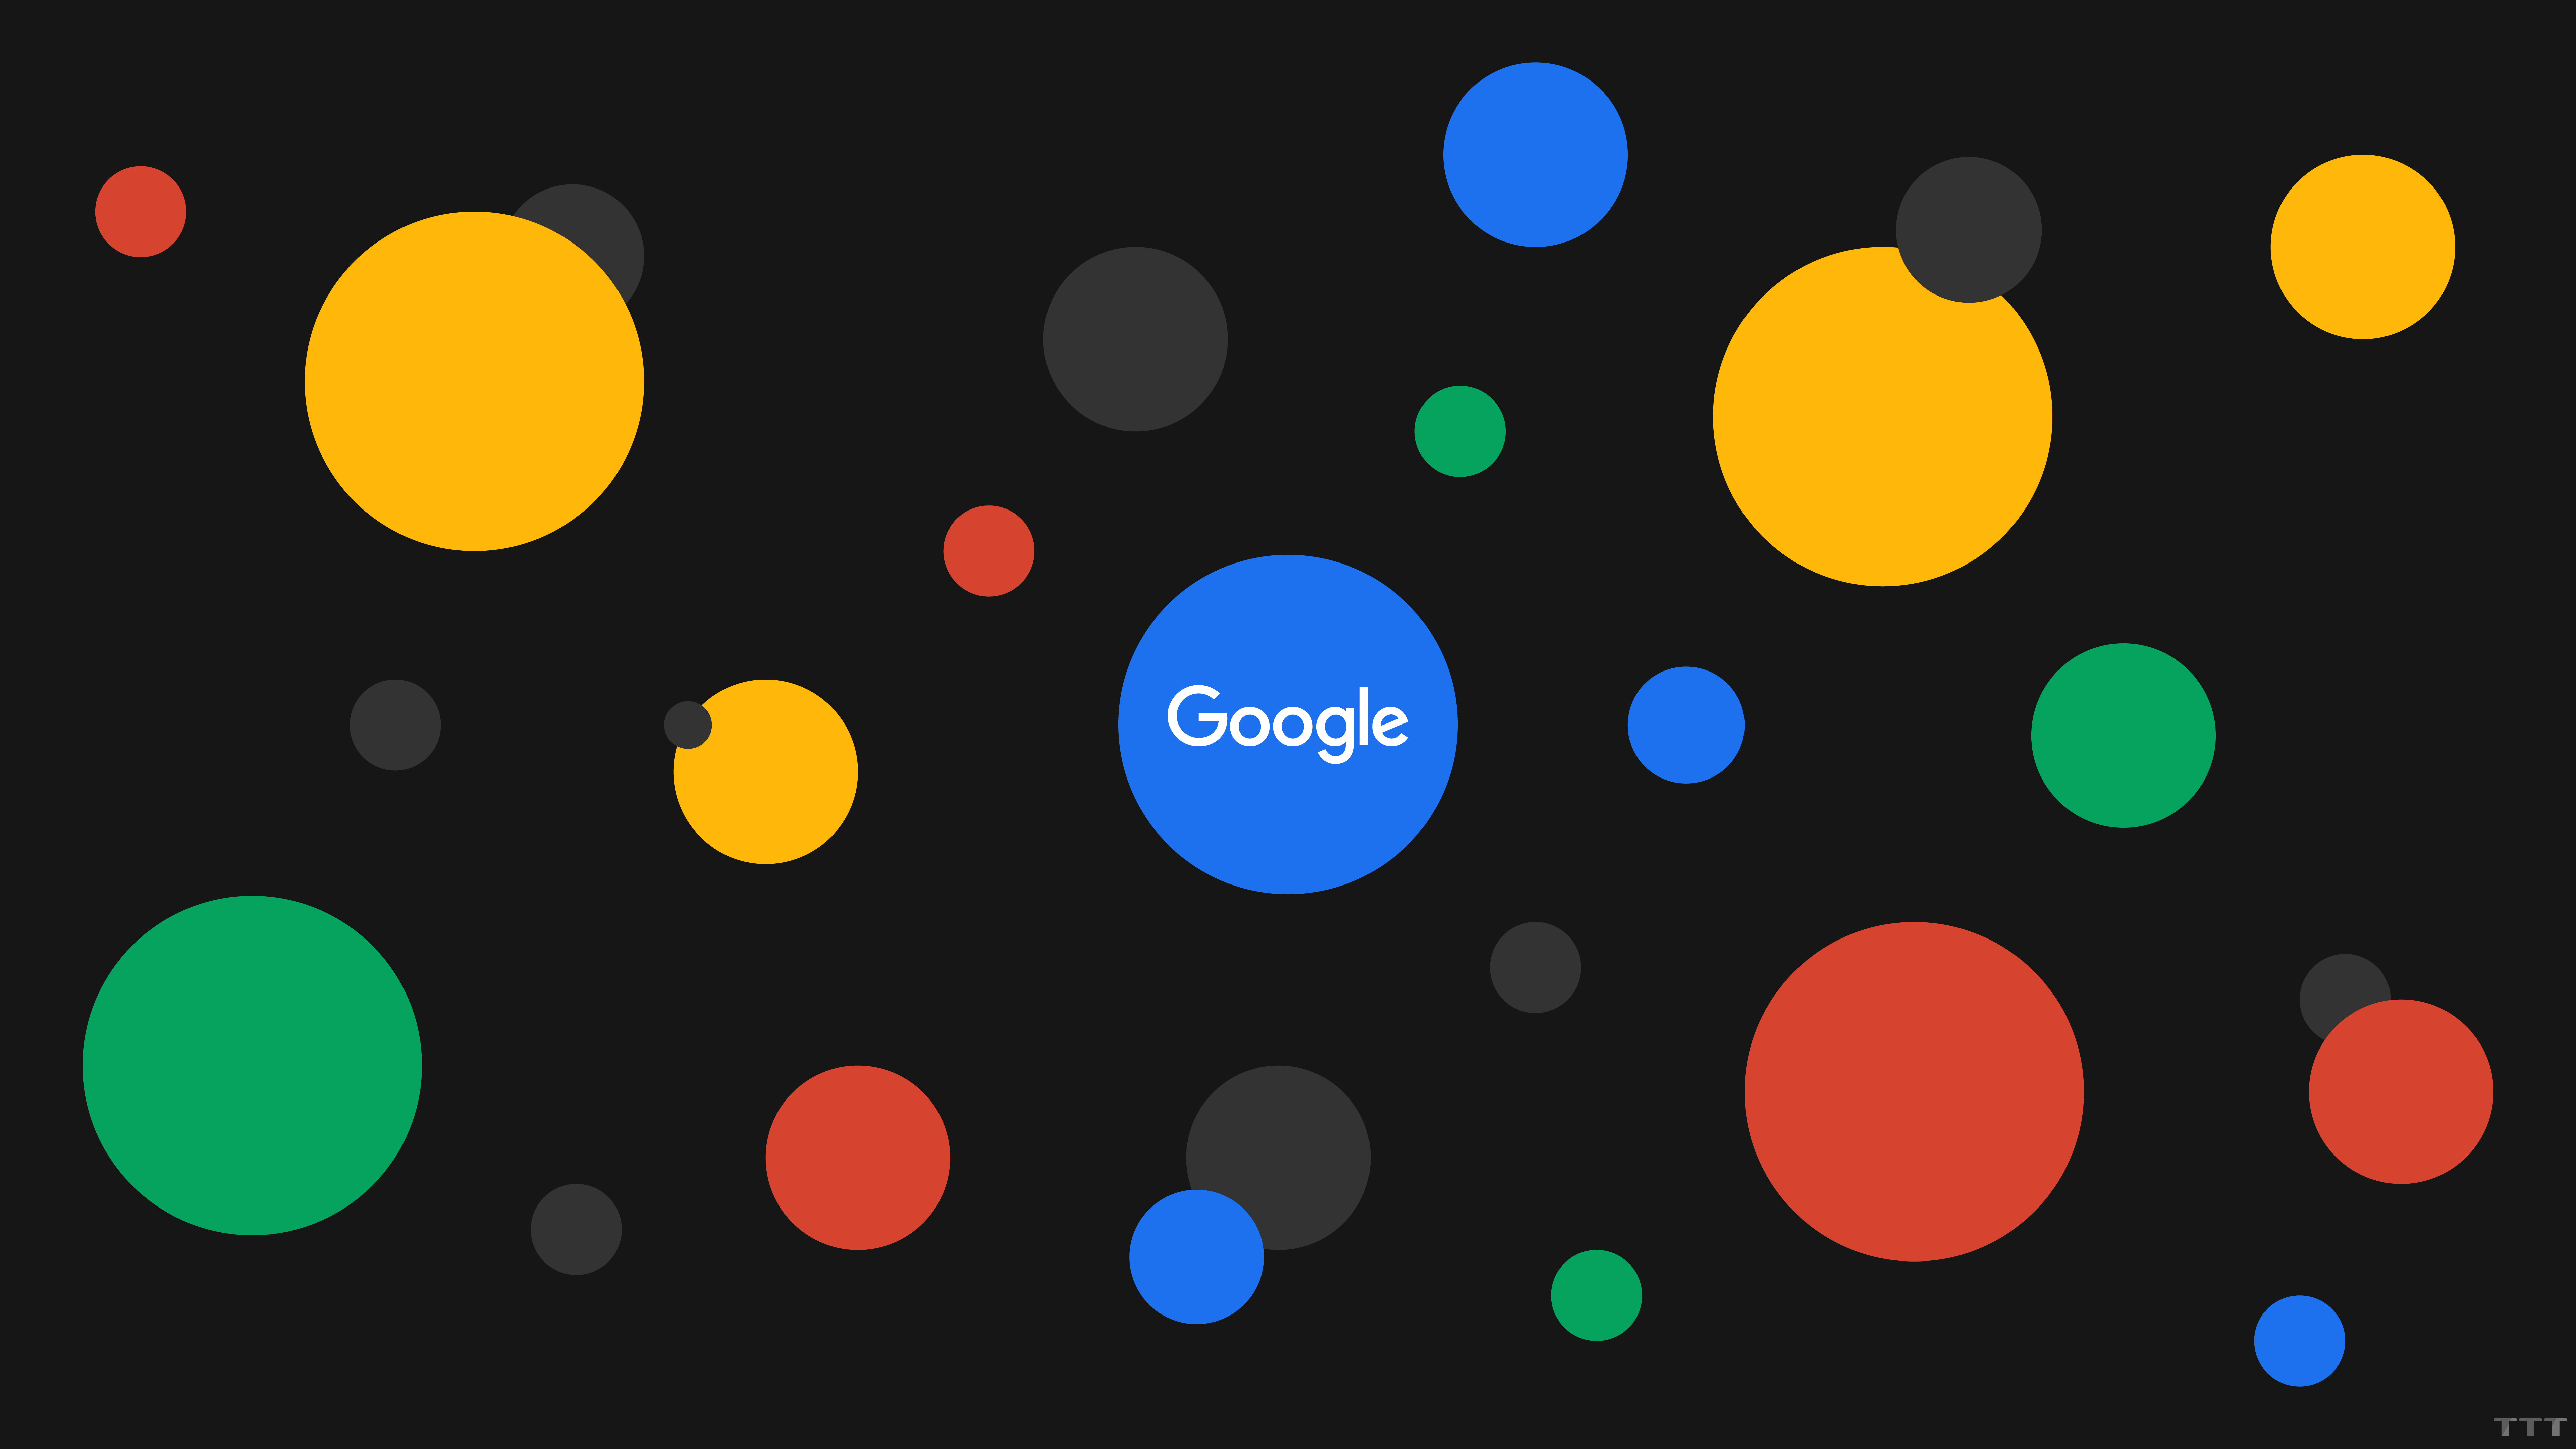 Request Google Wallpaper Remove The Word And Place